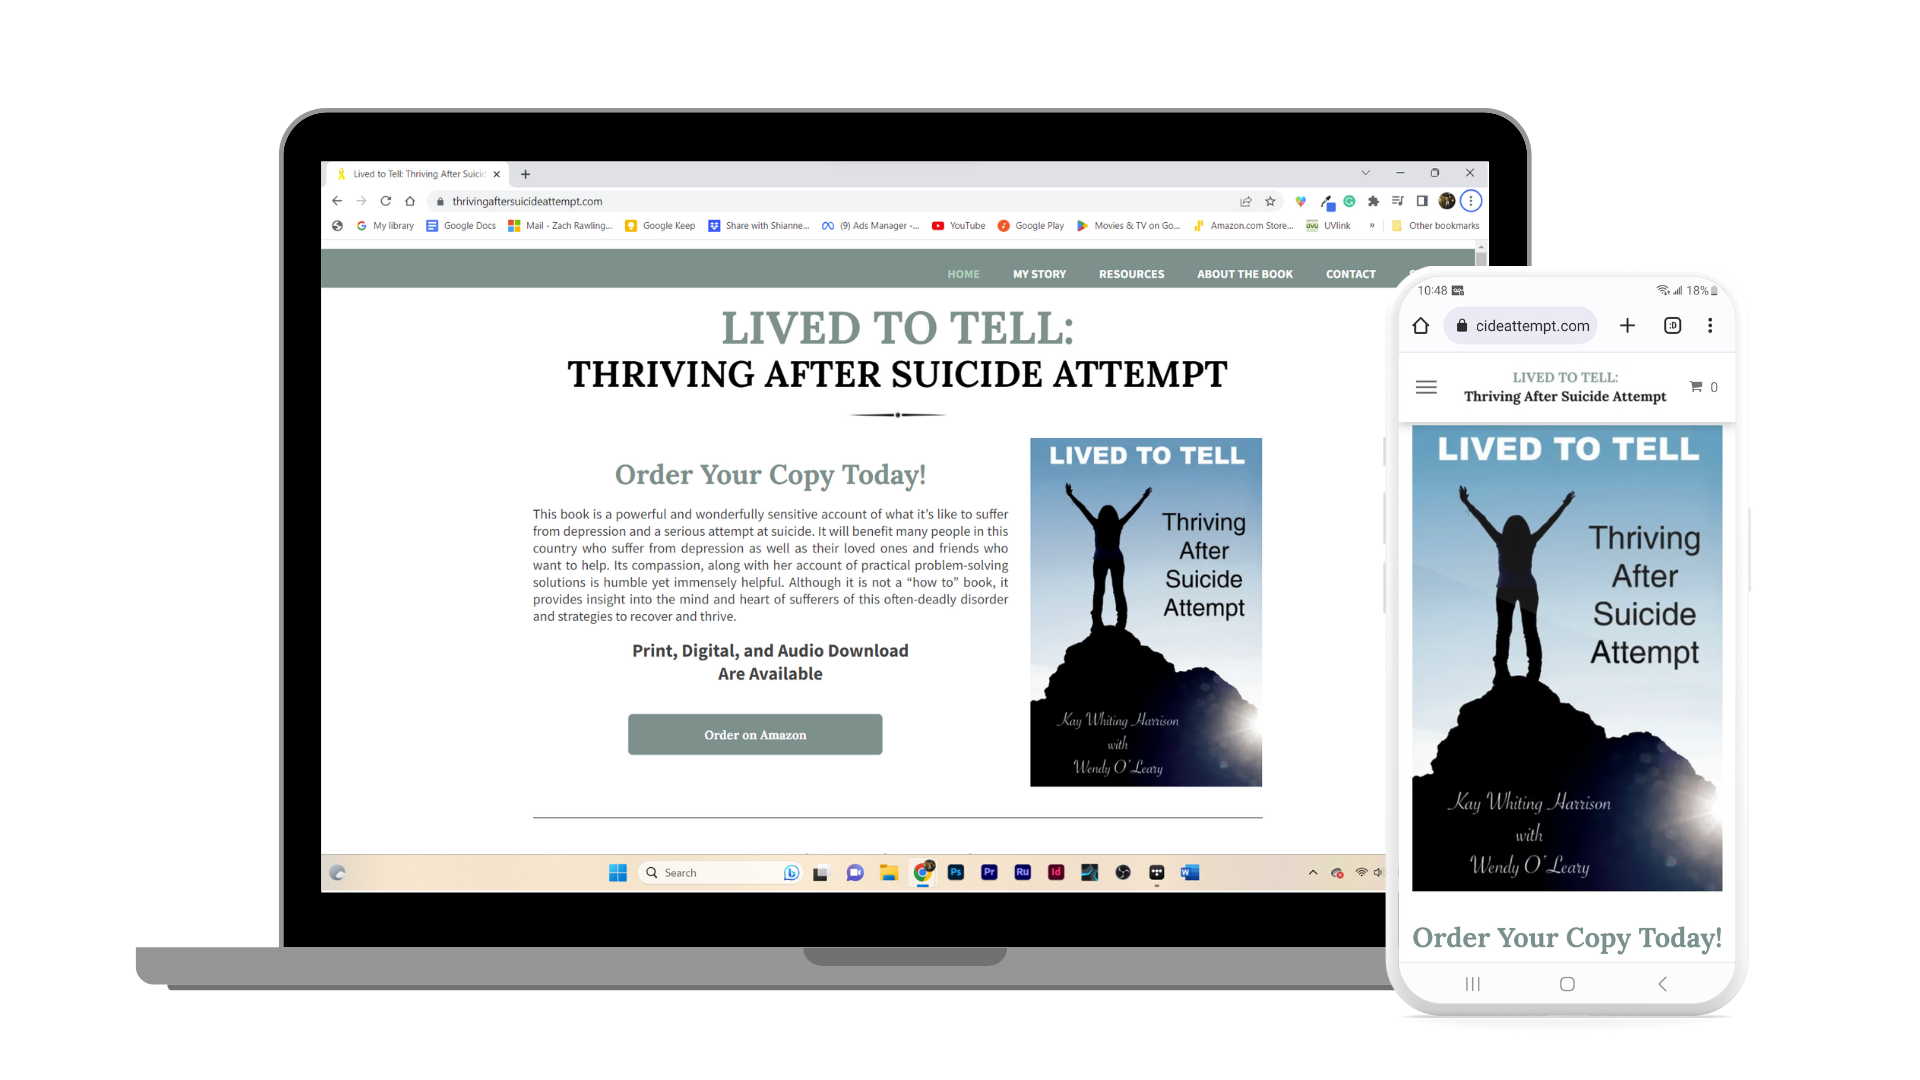 An image showcasing the web design portfolio section of Rawlings Media's work. It features a laptop and a smartphone with the Lived to Tell: Thriving After Suicide Attempt website displayed on their screens. The laptop and smartphone combination highlights the responsive design and cross-platform compatibility of the websites created by Rawlings Media. The Lived to Tell: Thriving After Suicide Attempt website reflects Rawlings Media's ability to design websites that are visually captivating, user-friendly, and effectively convey the author's message. This image represents Rawlings Media's commitment to delivering impactful web design solutions that connect with the target audience and provide an engaging online experience.